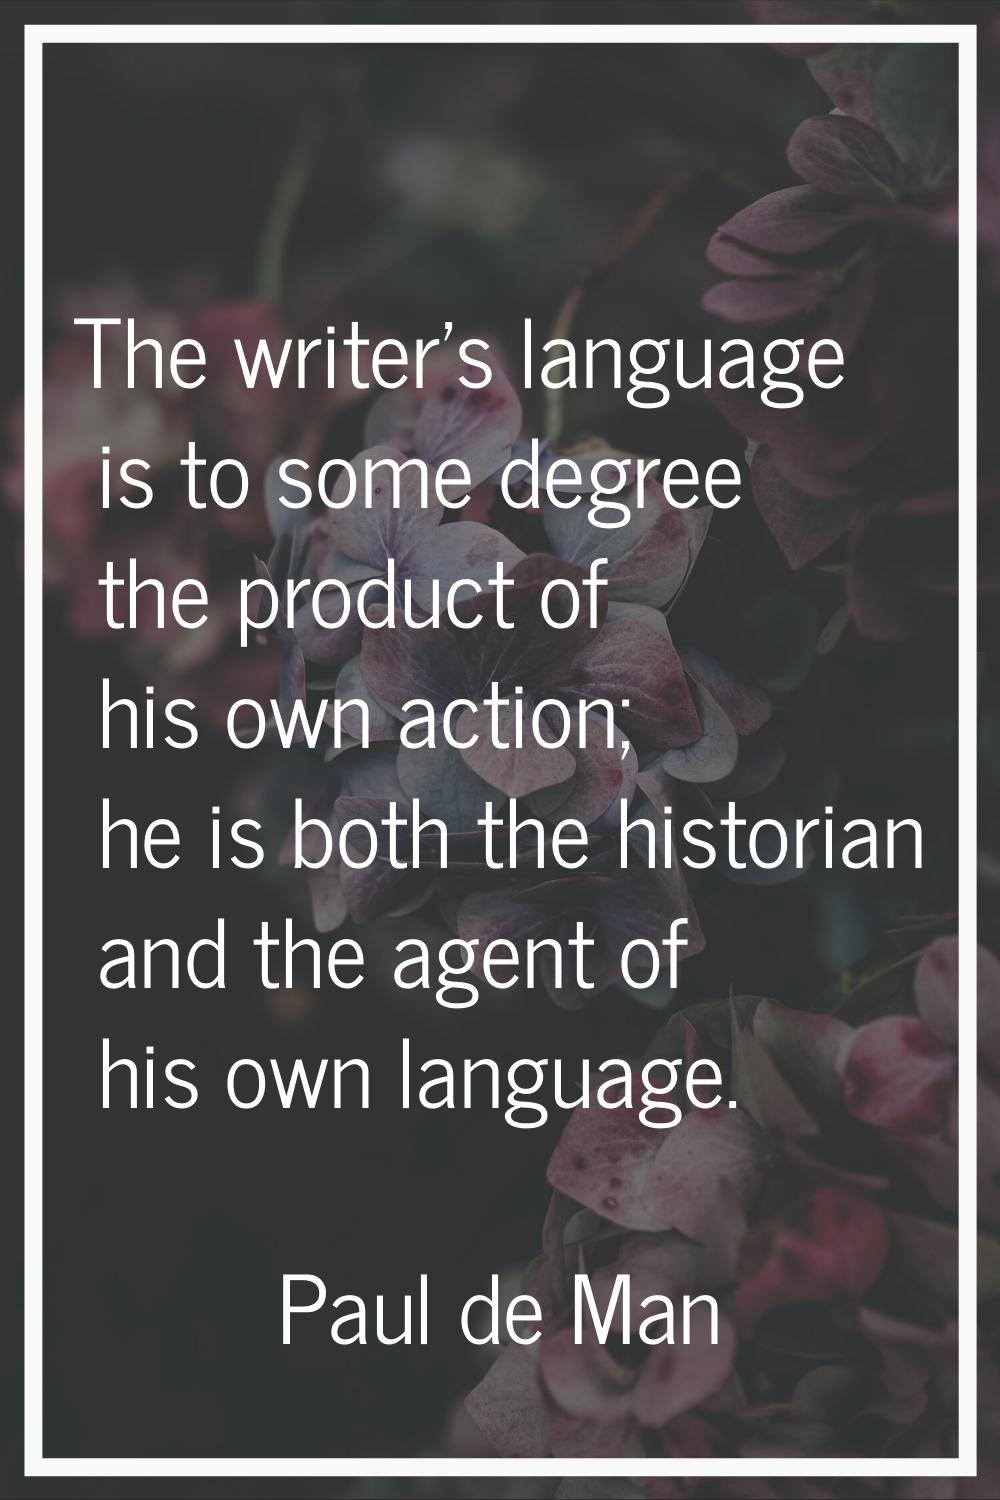 The writer's language is to some degree the product of his own action; he is both the historian and